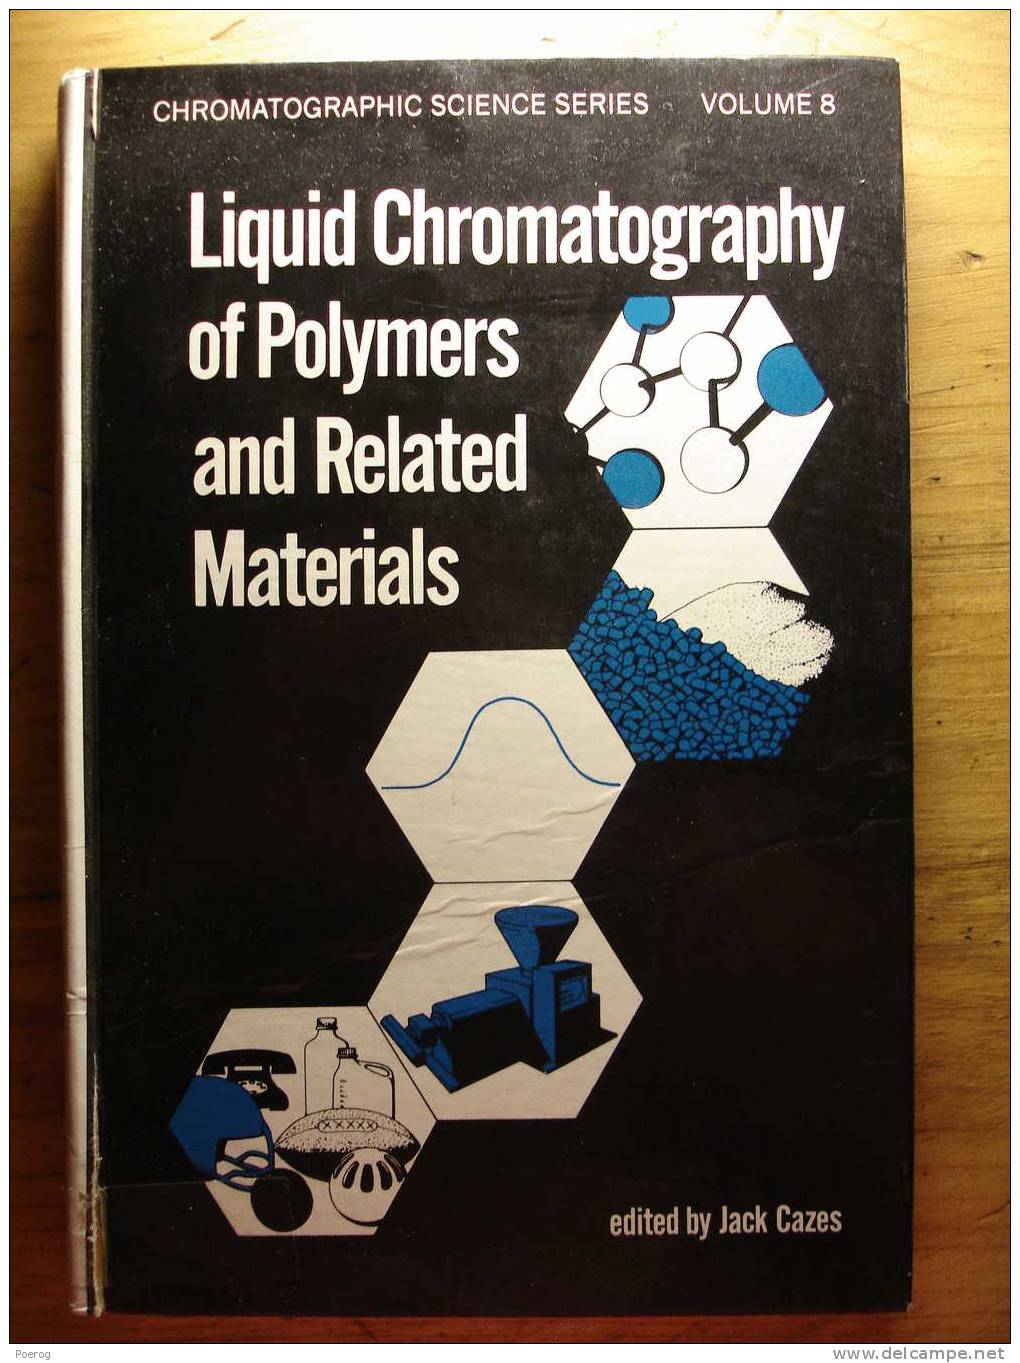 LIQUID CHROMATOGRAPHY OF POLYMERS AND RELATED MATERIALS By JACK CAZES - DEKKER NEW YORK 1977 - Química